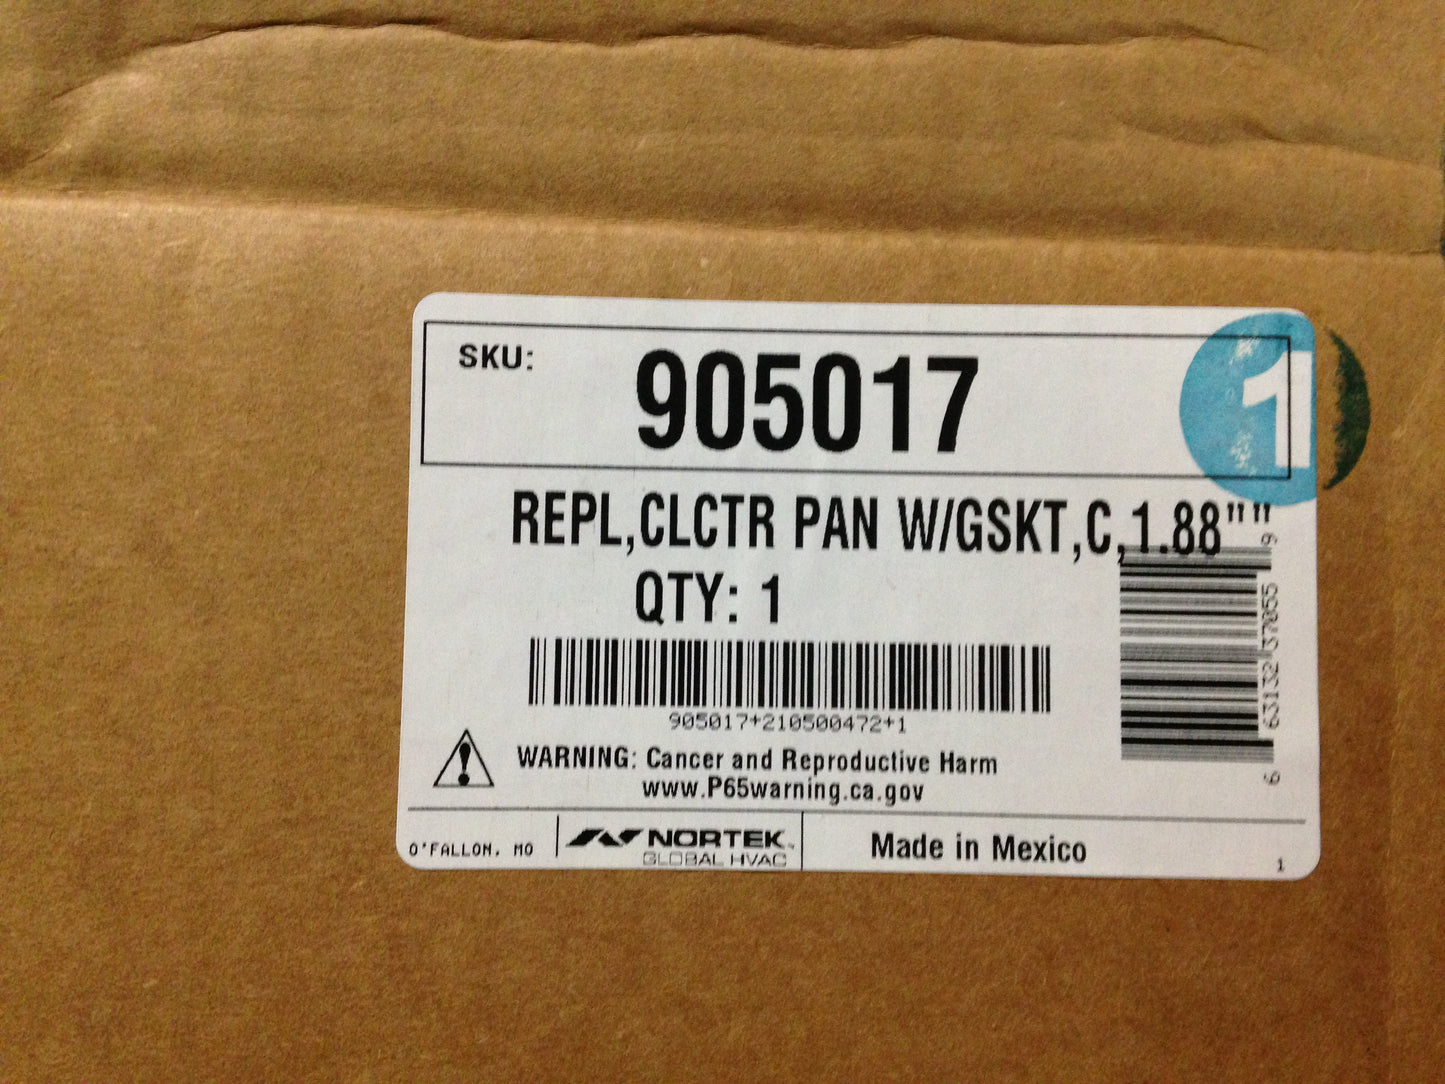 REPLACEMENT CLCTR PAN WITH GASKET C, 1.88"